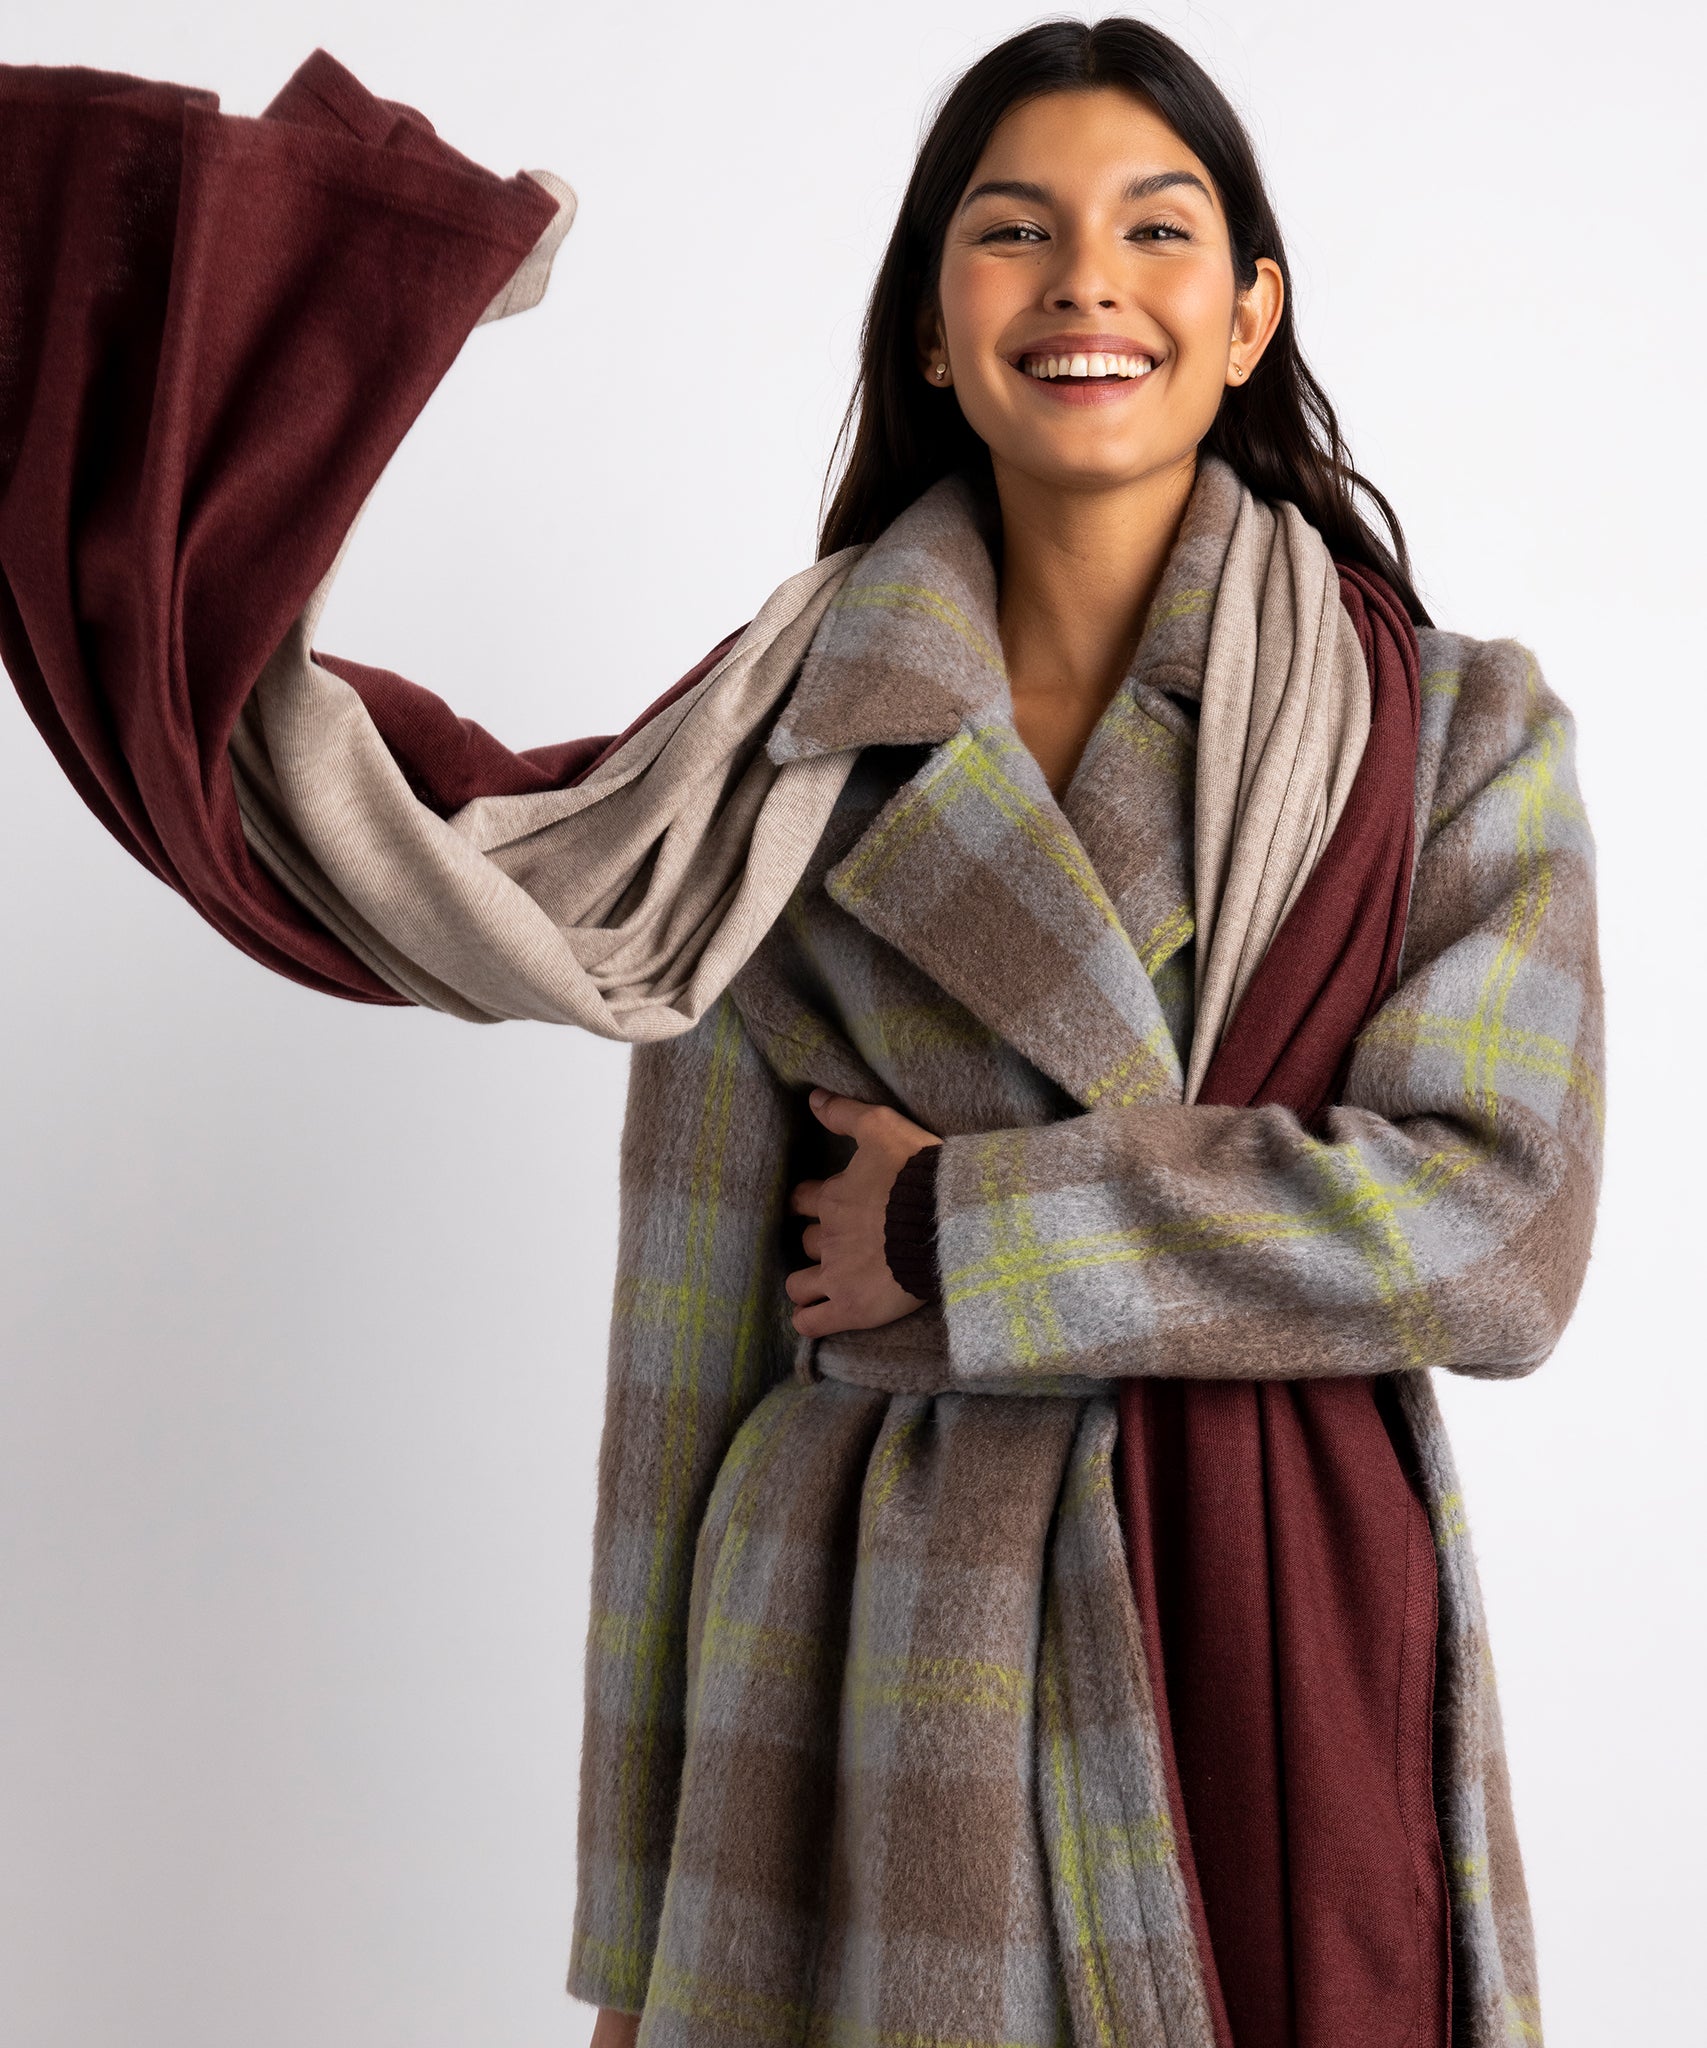 Model wearing two Essential Travel Wraps around her neck.  One is the brick colorway and one is the farro colorway.  She is wearing a plaid coat and smiling.  One side of the wraps has been thrown in the air.